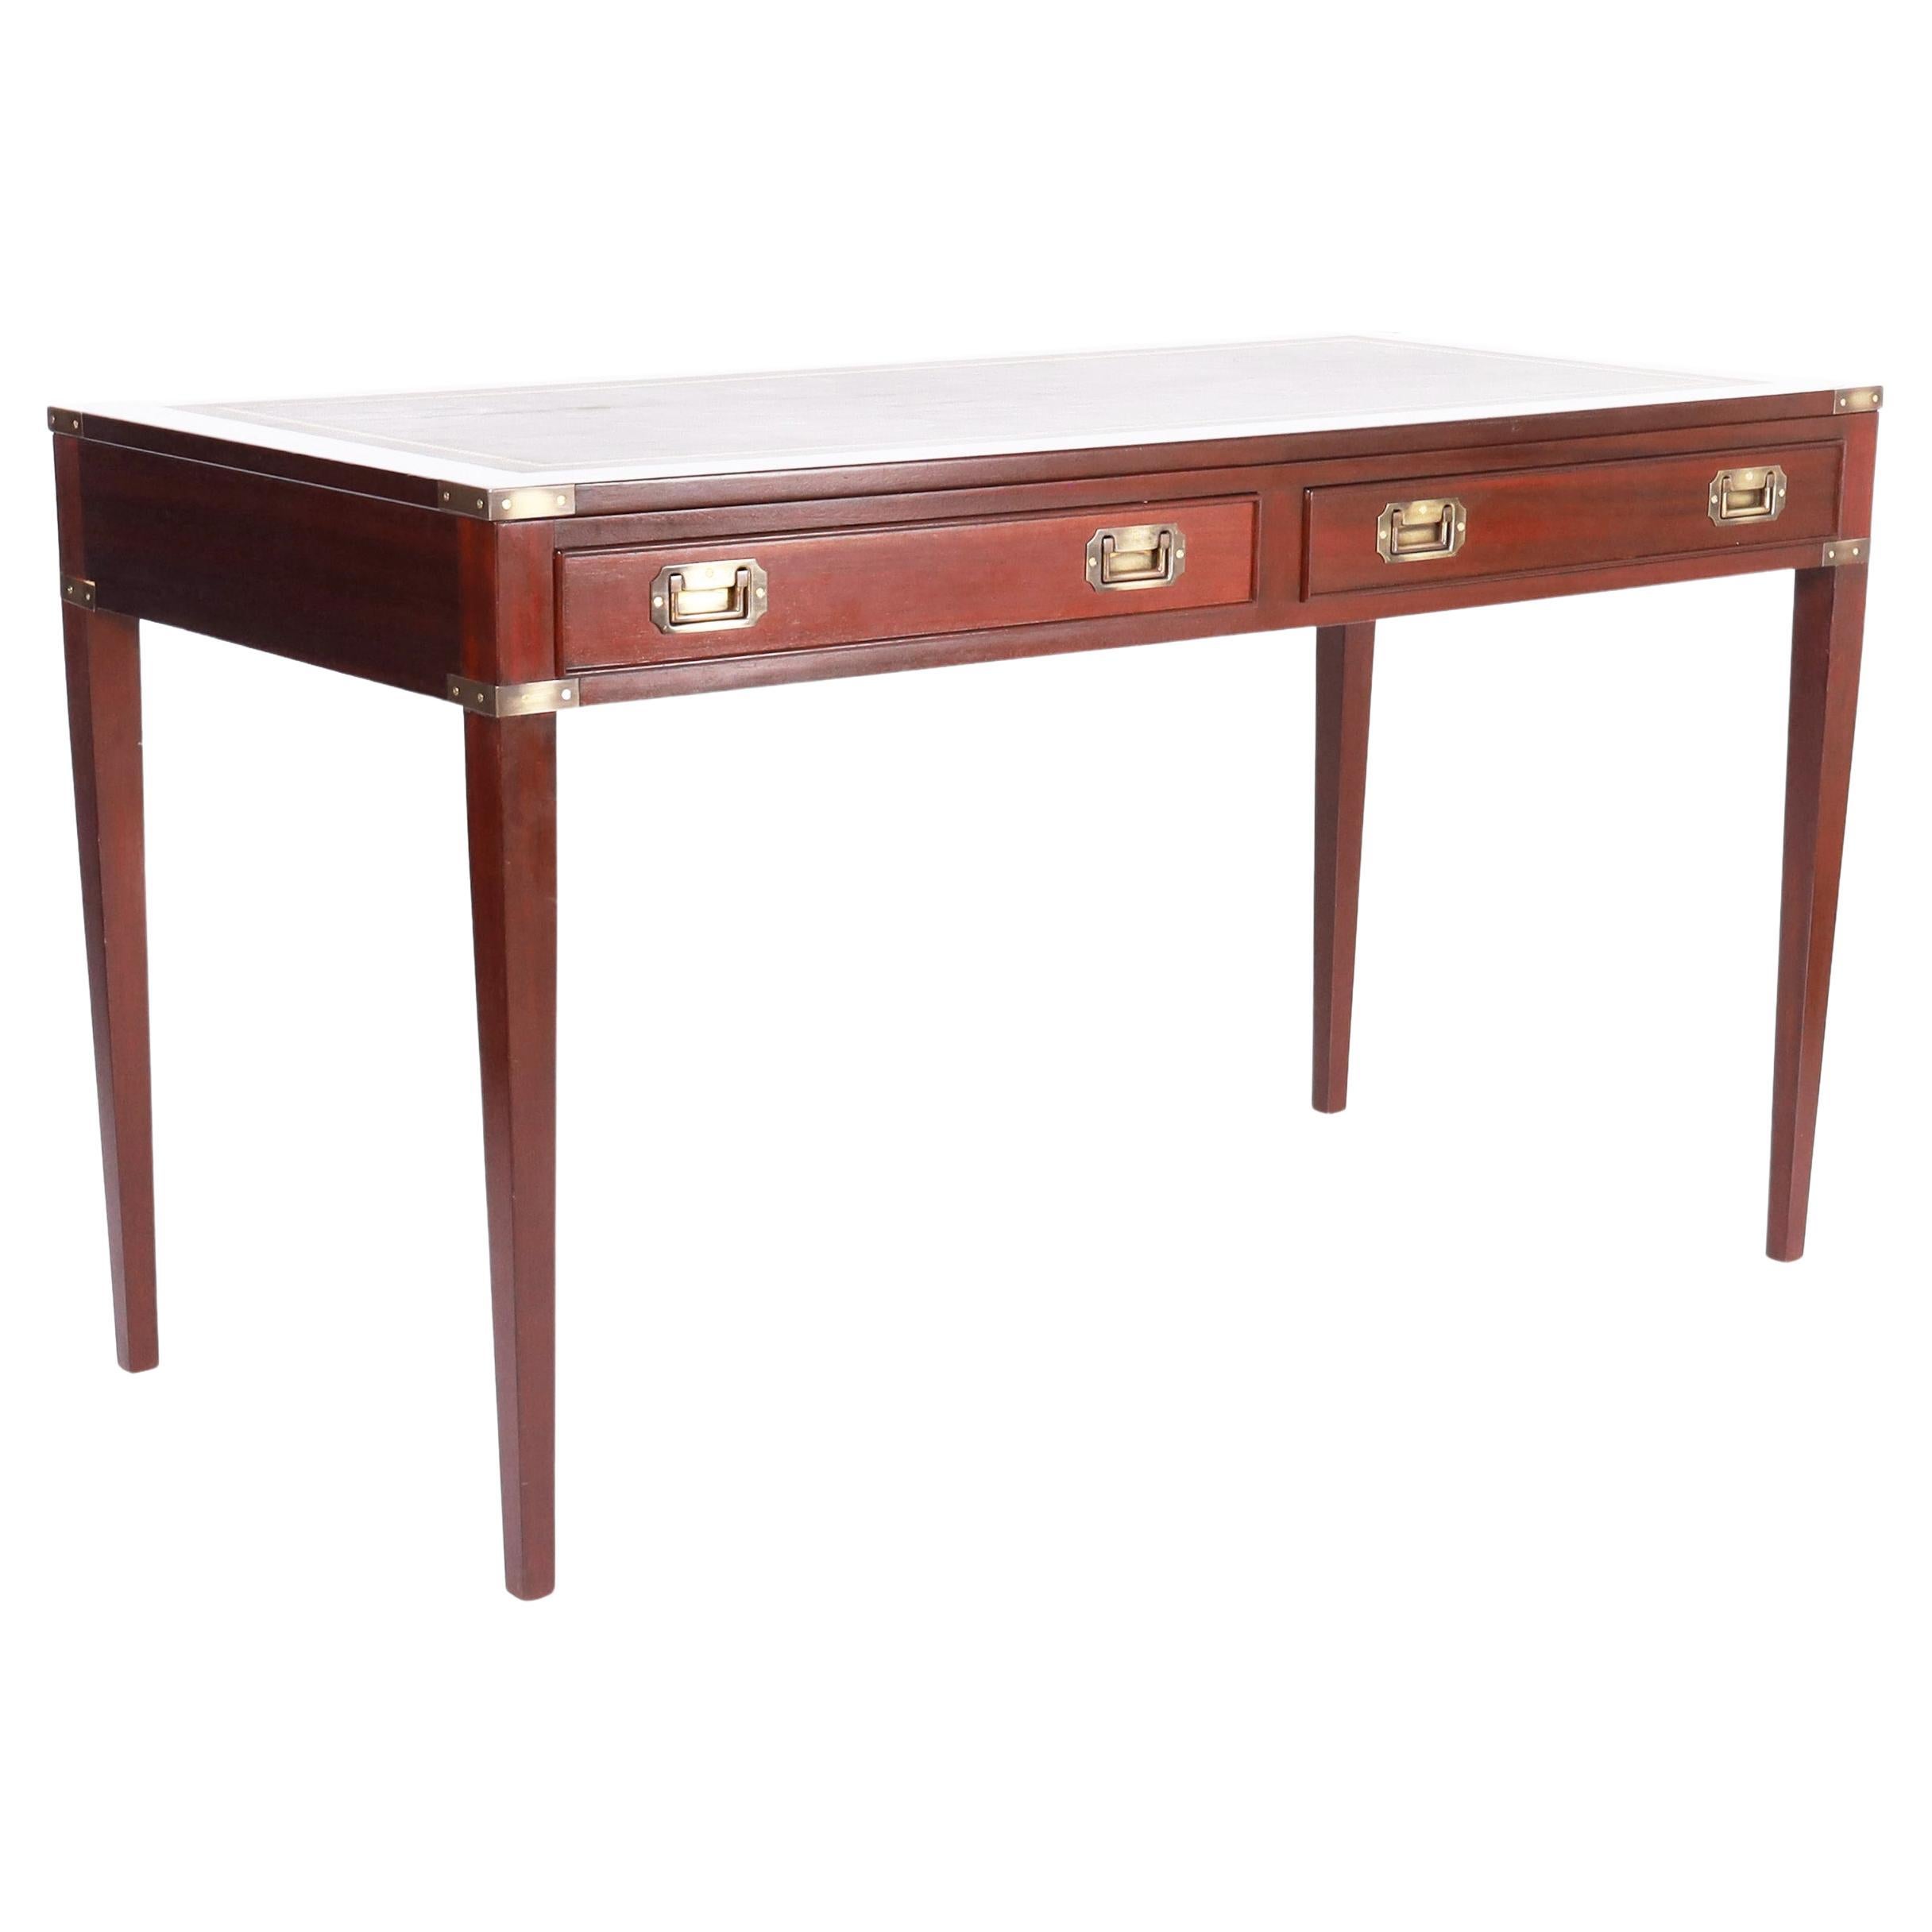 English Leather Top Campaign Style Desk For Sale